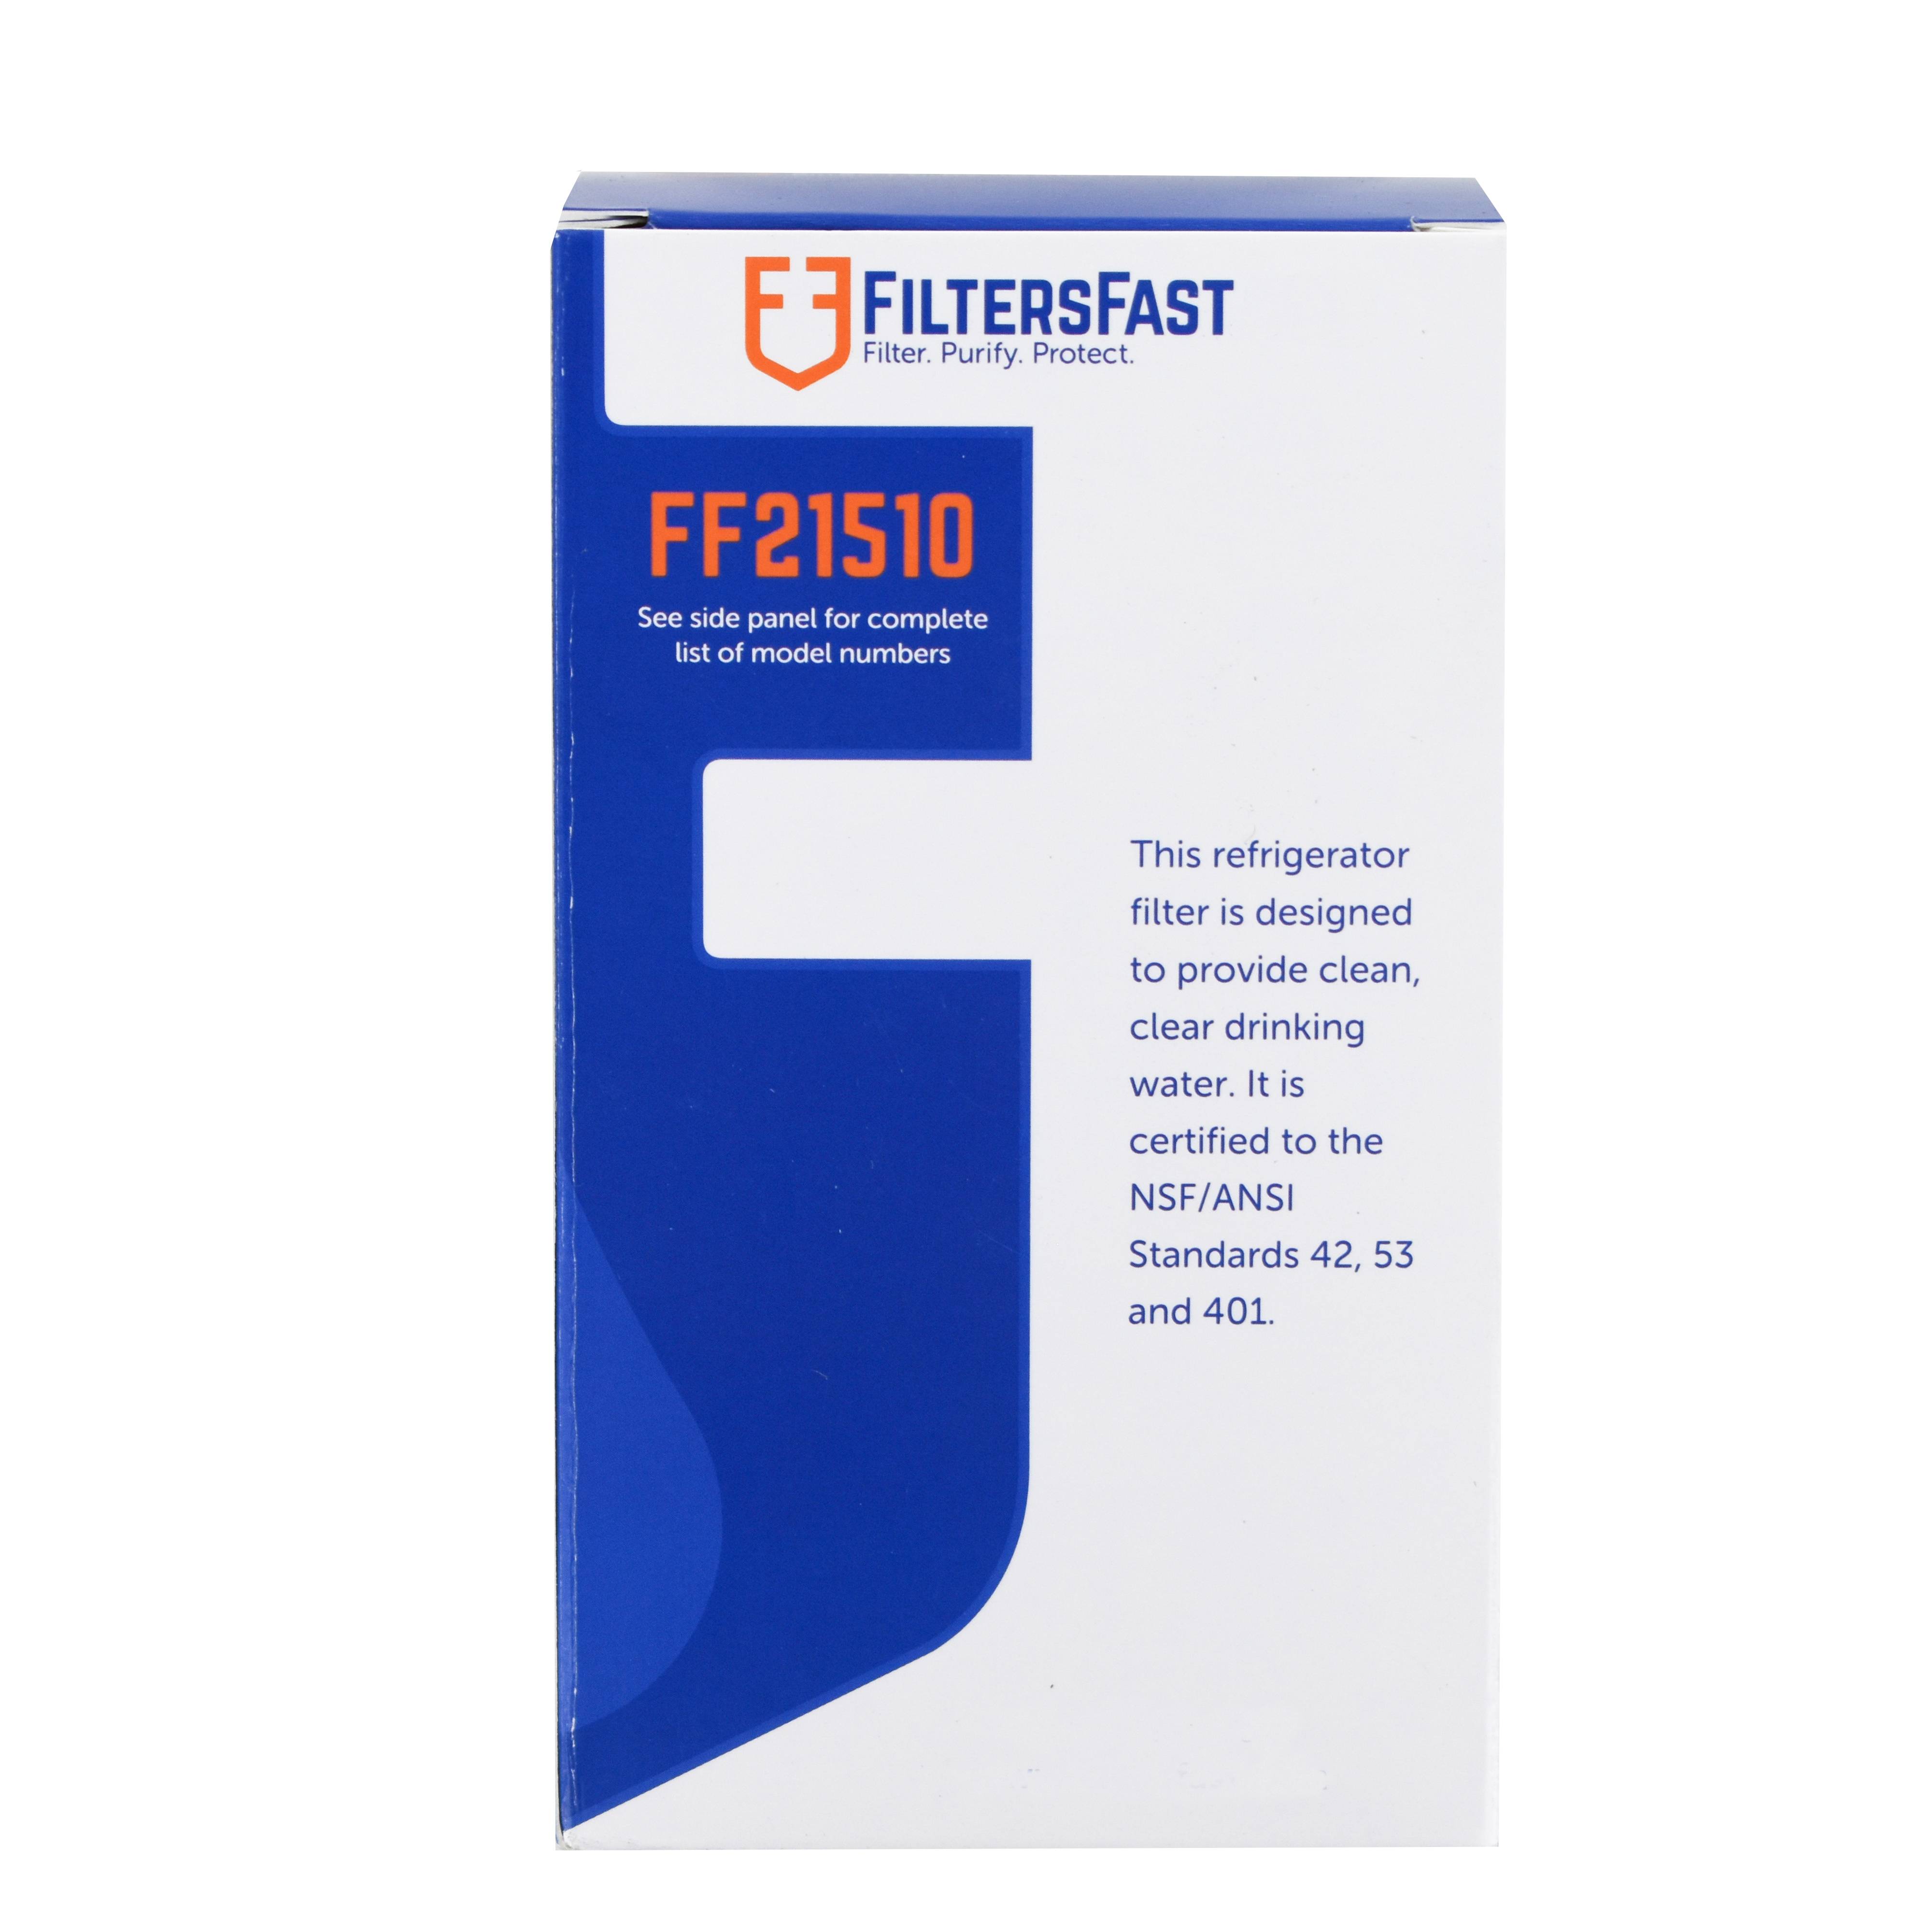 Filters Fast&reg; FF21510 Replacement for PuriClean UKF7003AXX